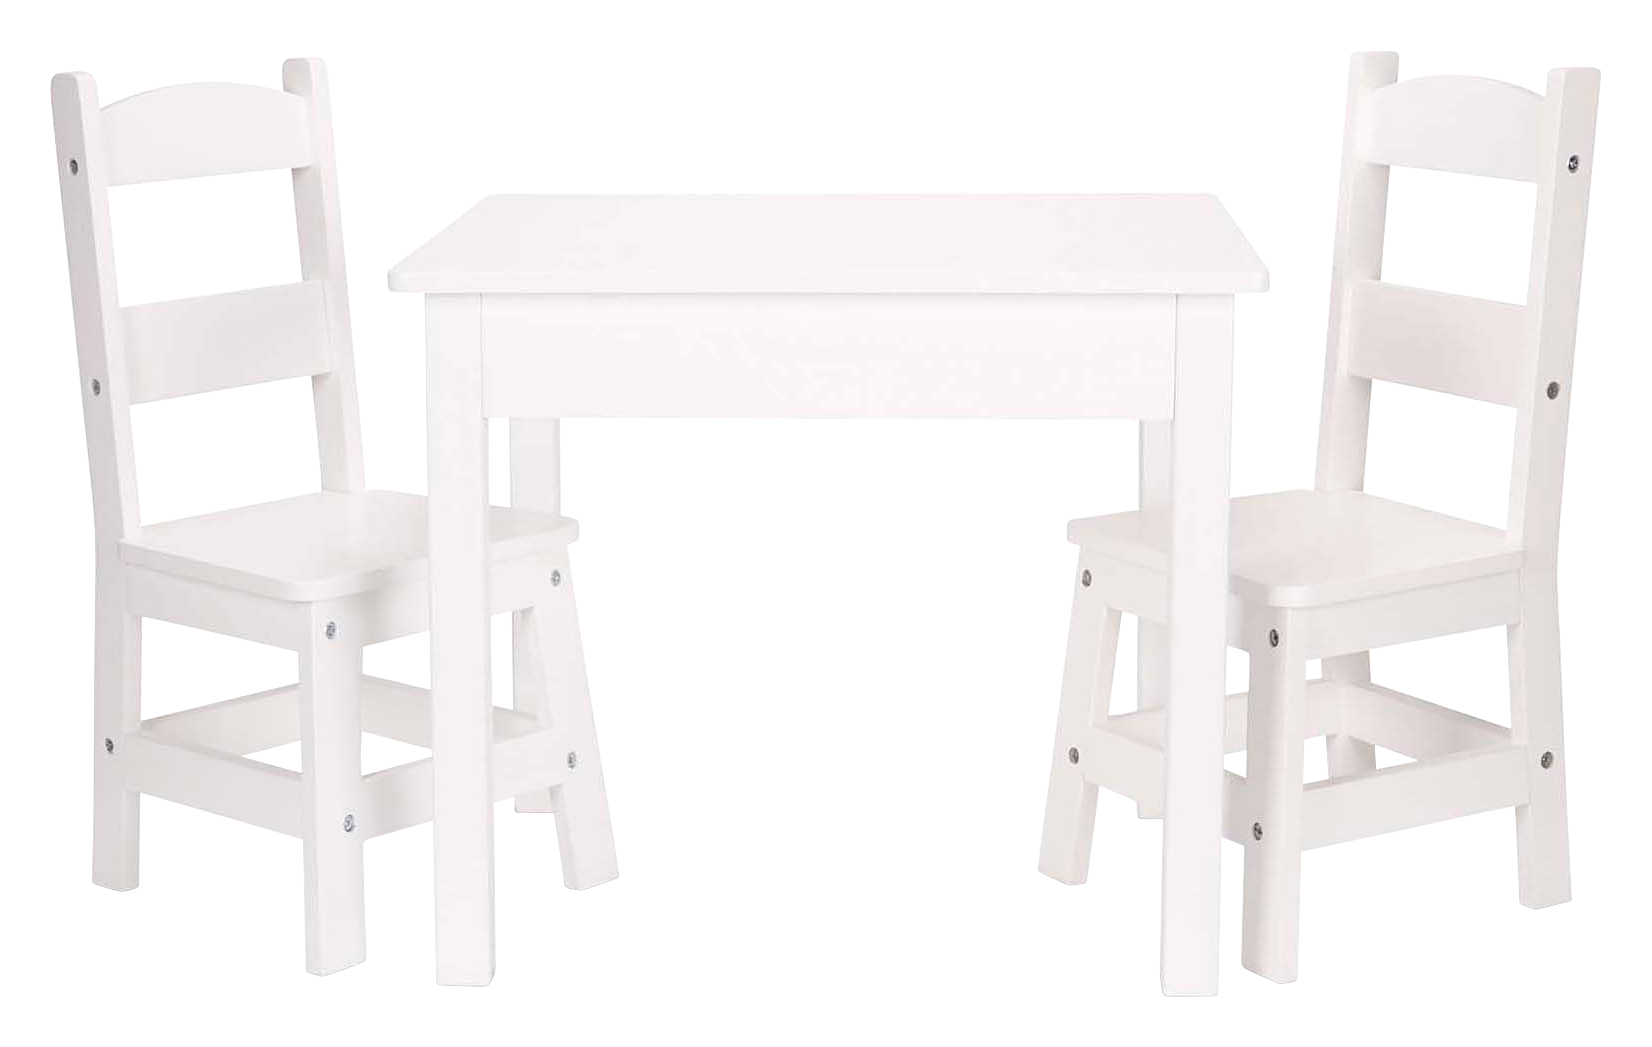 Melissa & Doug Solid Wood Table & Chairs 3-Piece Set for Kids - White